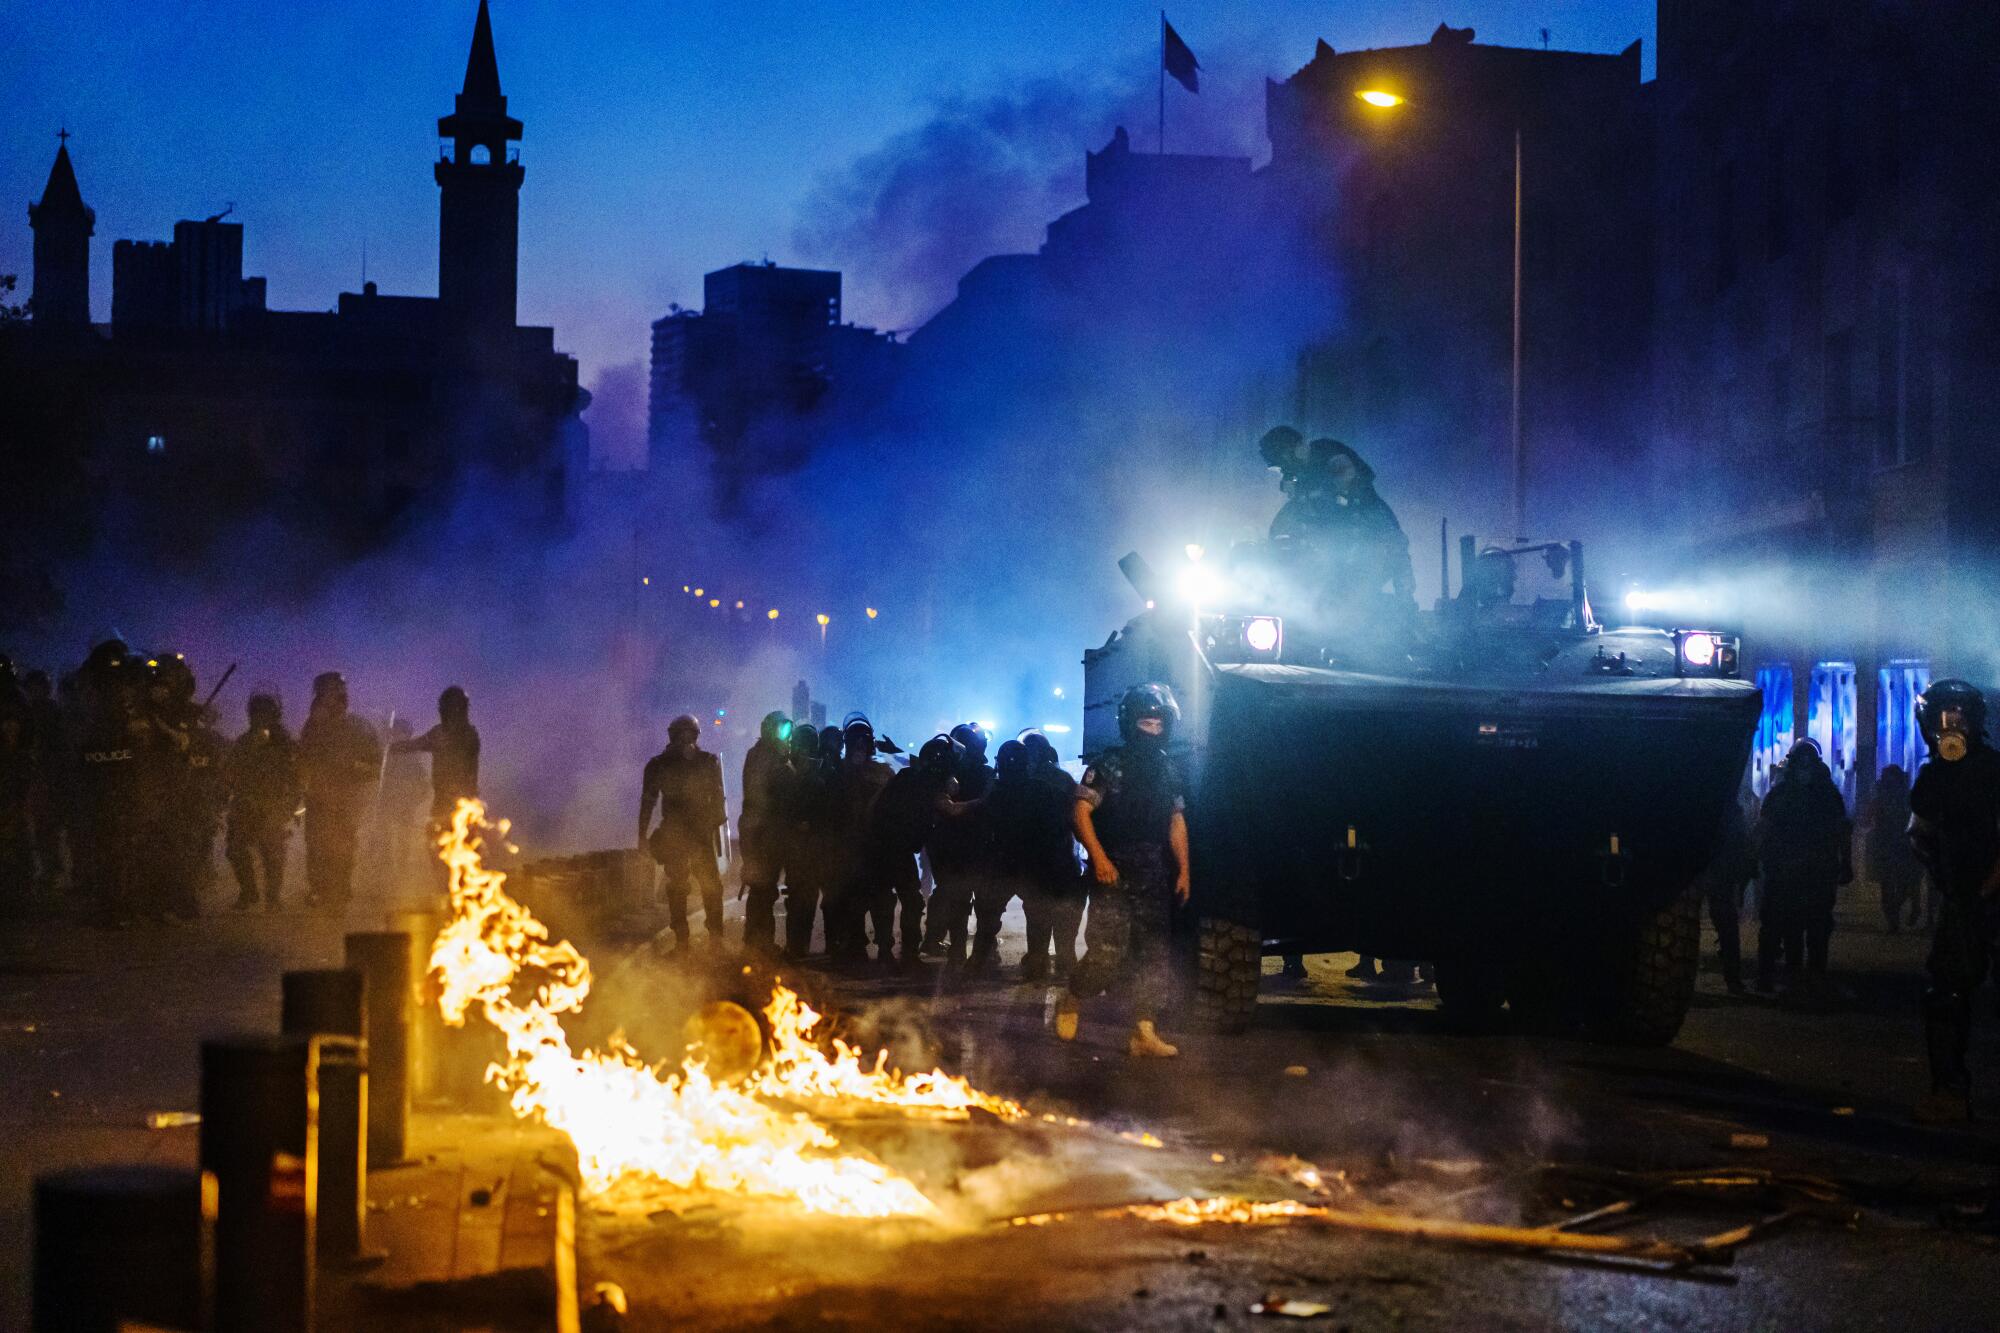 A police vehicle and officers in riot gear move through purplish haze and past flames leaping on the street.